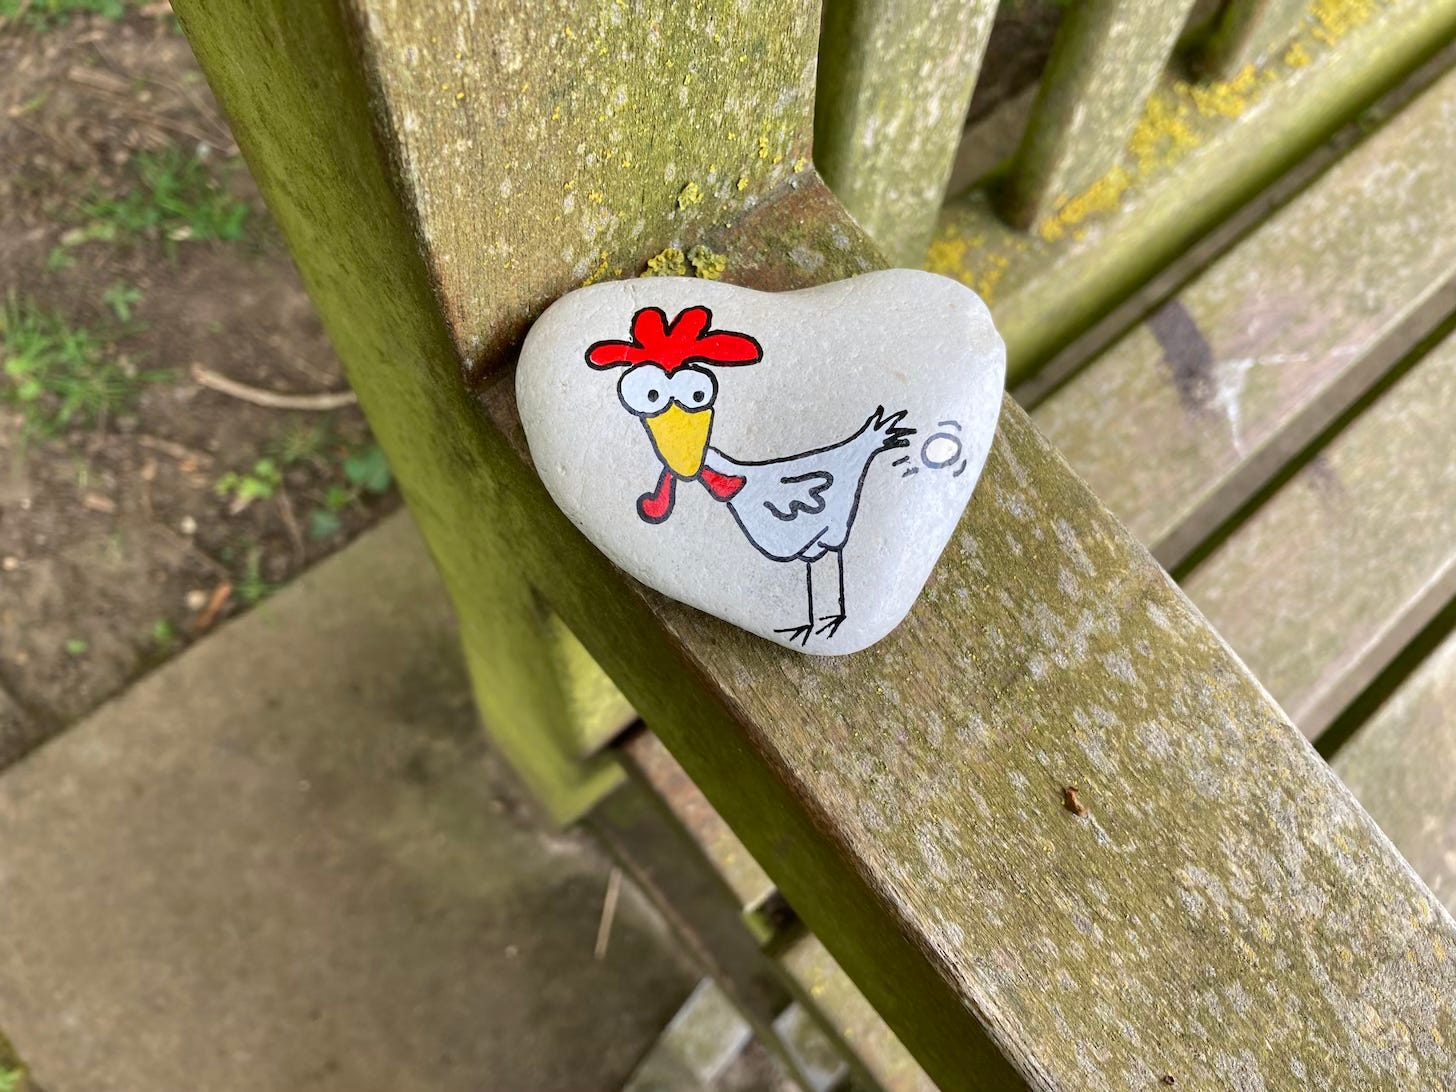 Heart shaped stone painted with chicken laying an egg in comical fashion